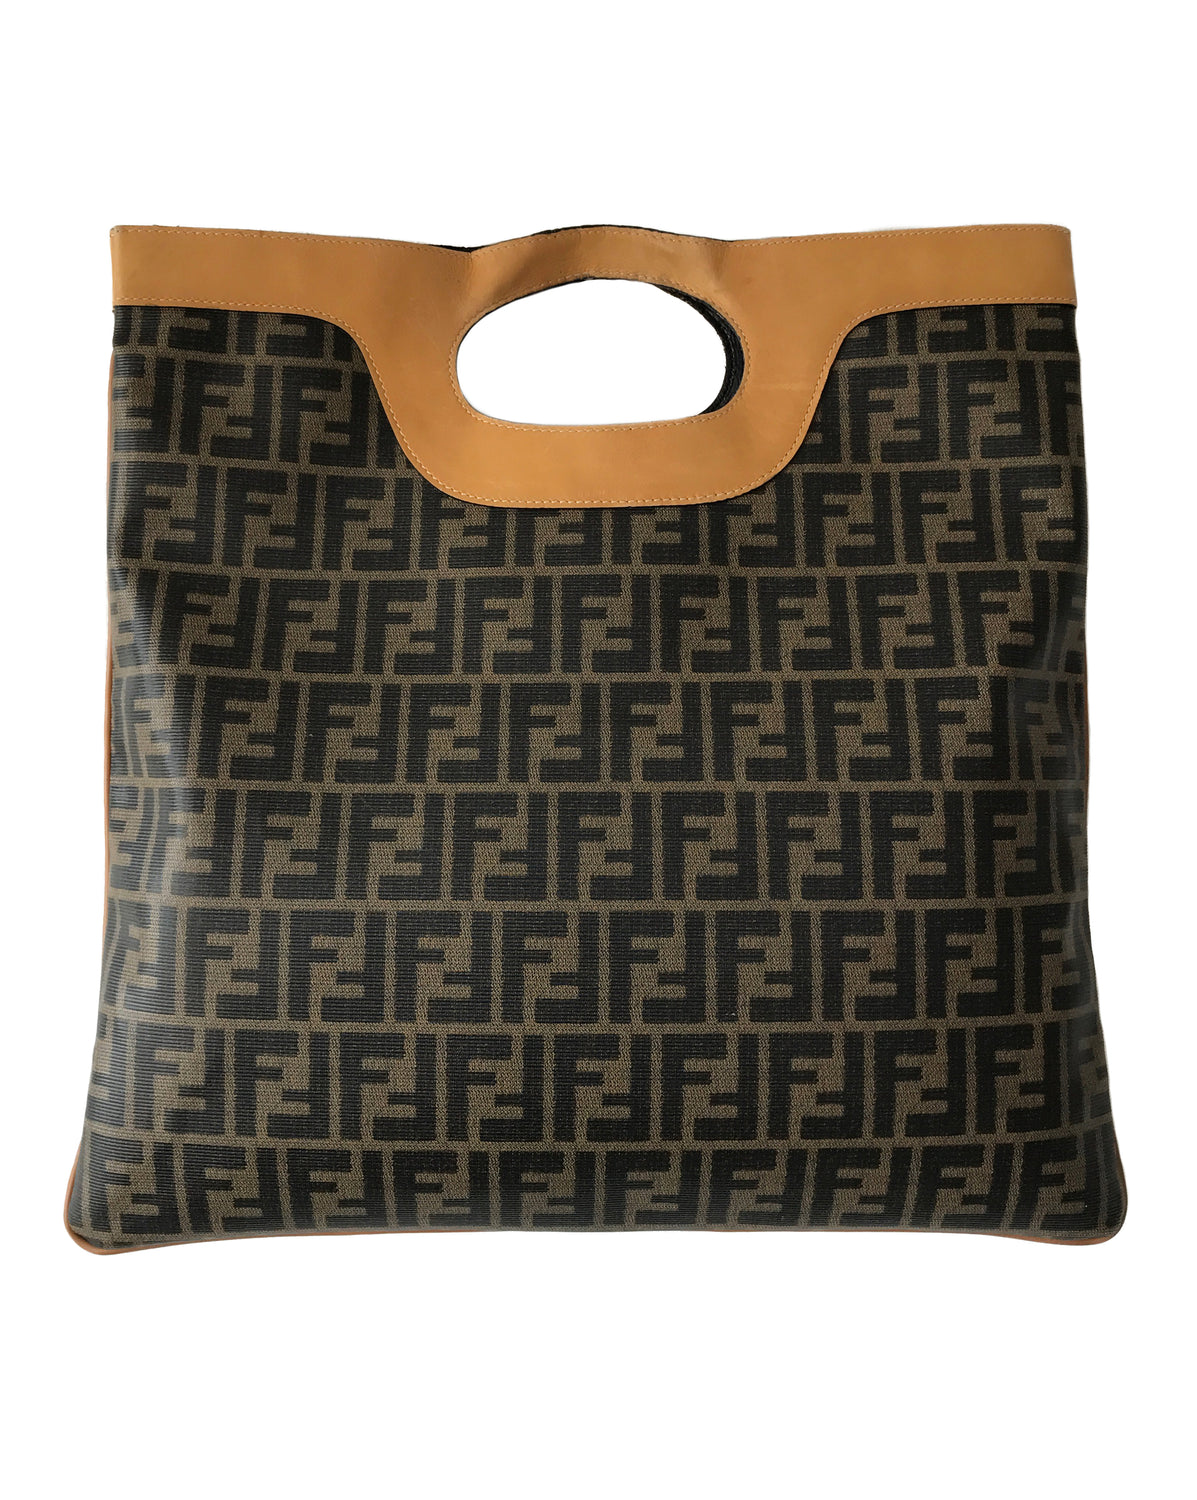 Fruit Vintage Fendi fold over convertible clutch tote bag in the iconic Fendi Zucca monogram canvas with Fendi Logo stamp.